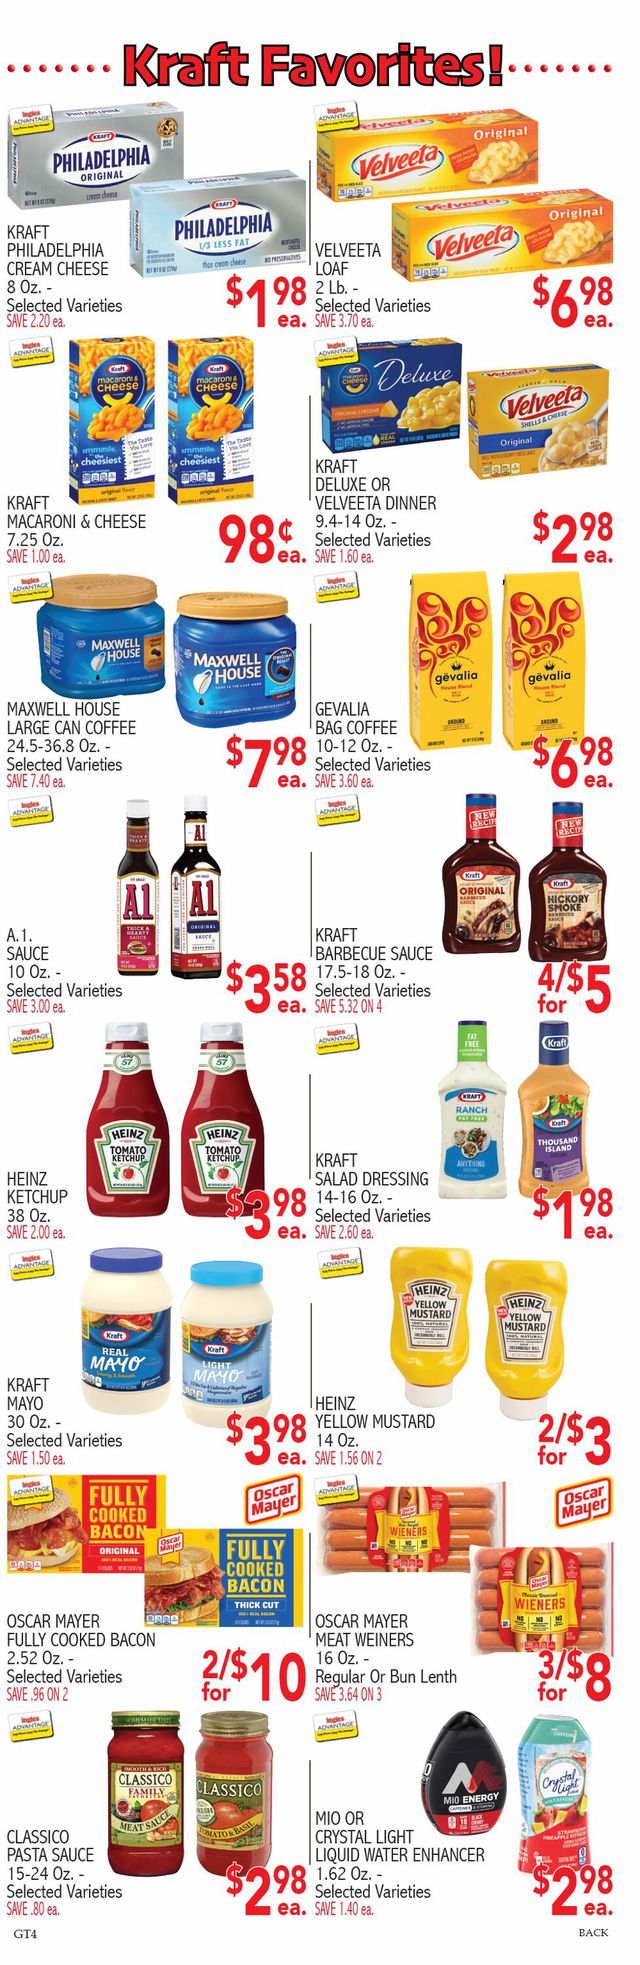 Ingles Ad from 01/25/2023